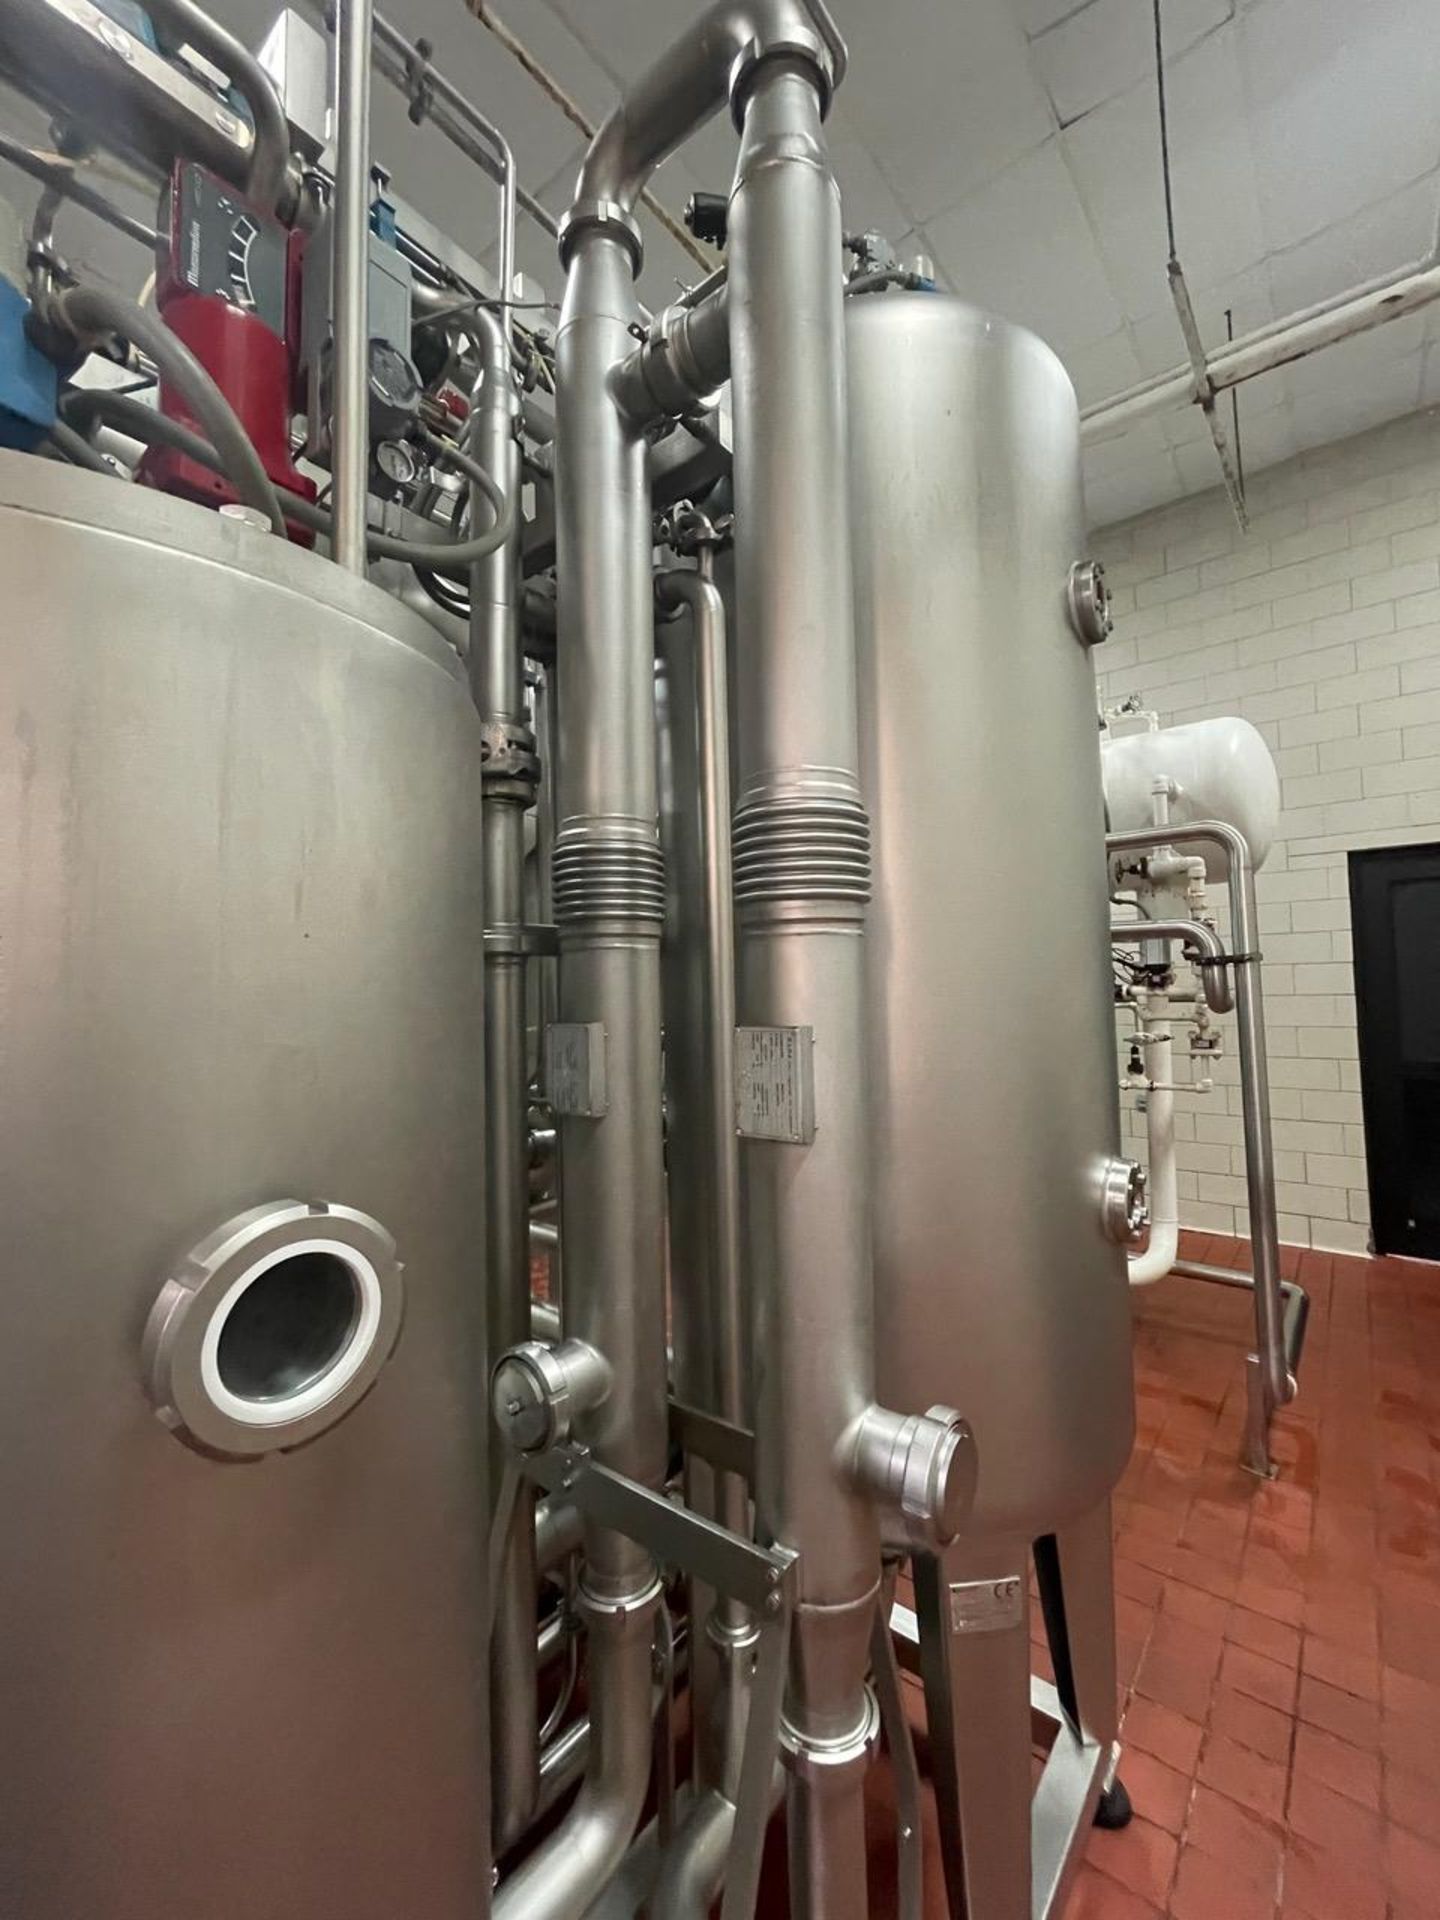 Sidel Alsim MAS MIX 30000L High Speed Continuous Softdrink Blending System - Running Video Available - Image 4 of 10